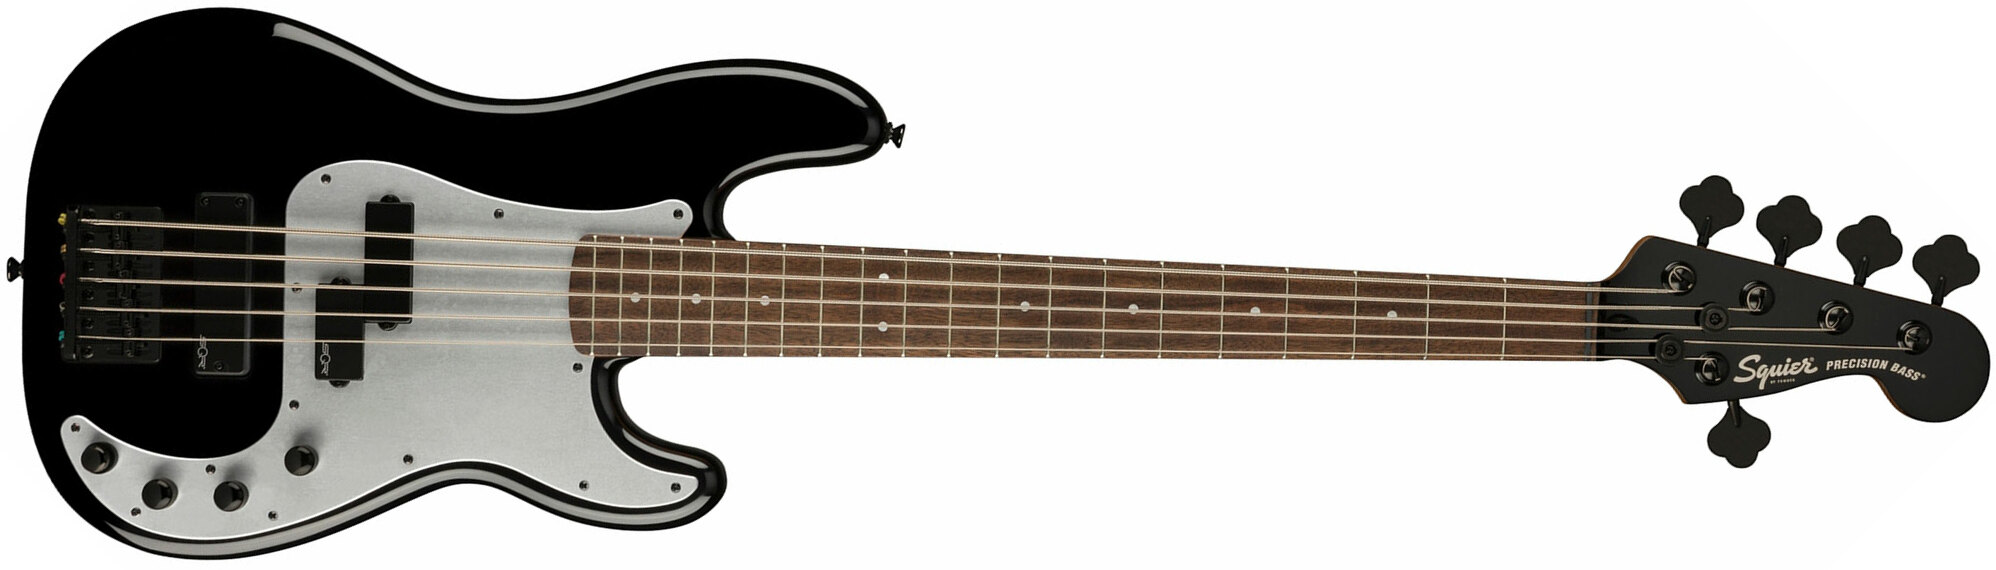 Squier Precision Bass Ph V Contemporary Active 5c Lau - Black - Solid body electric bass - Main picture